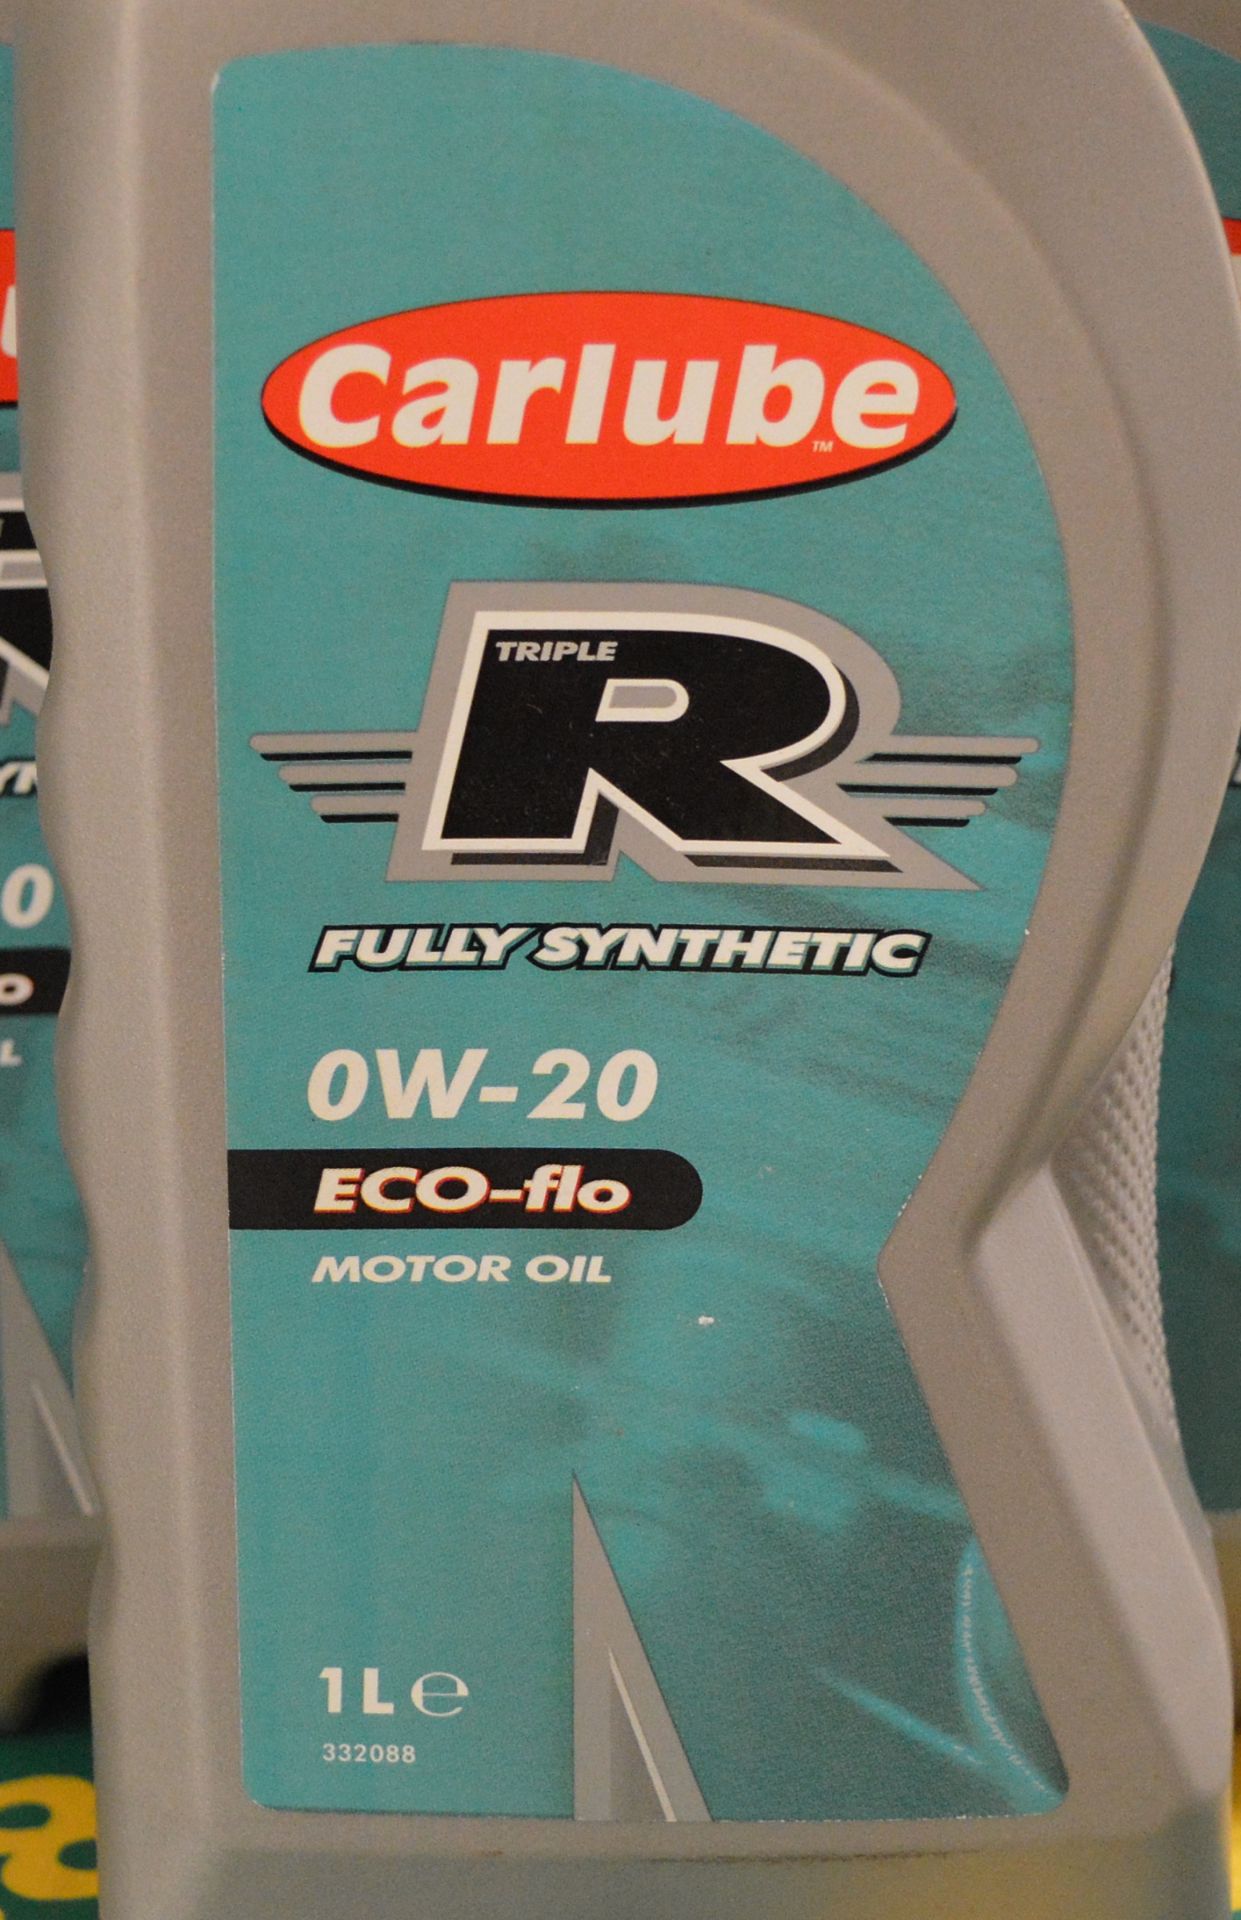 7x Carlube fully synthetic Motor Oil 0W-20 Eco-flo - 1L - Image 2 of 3